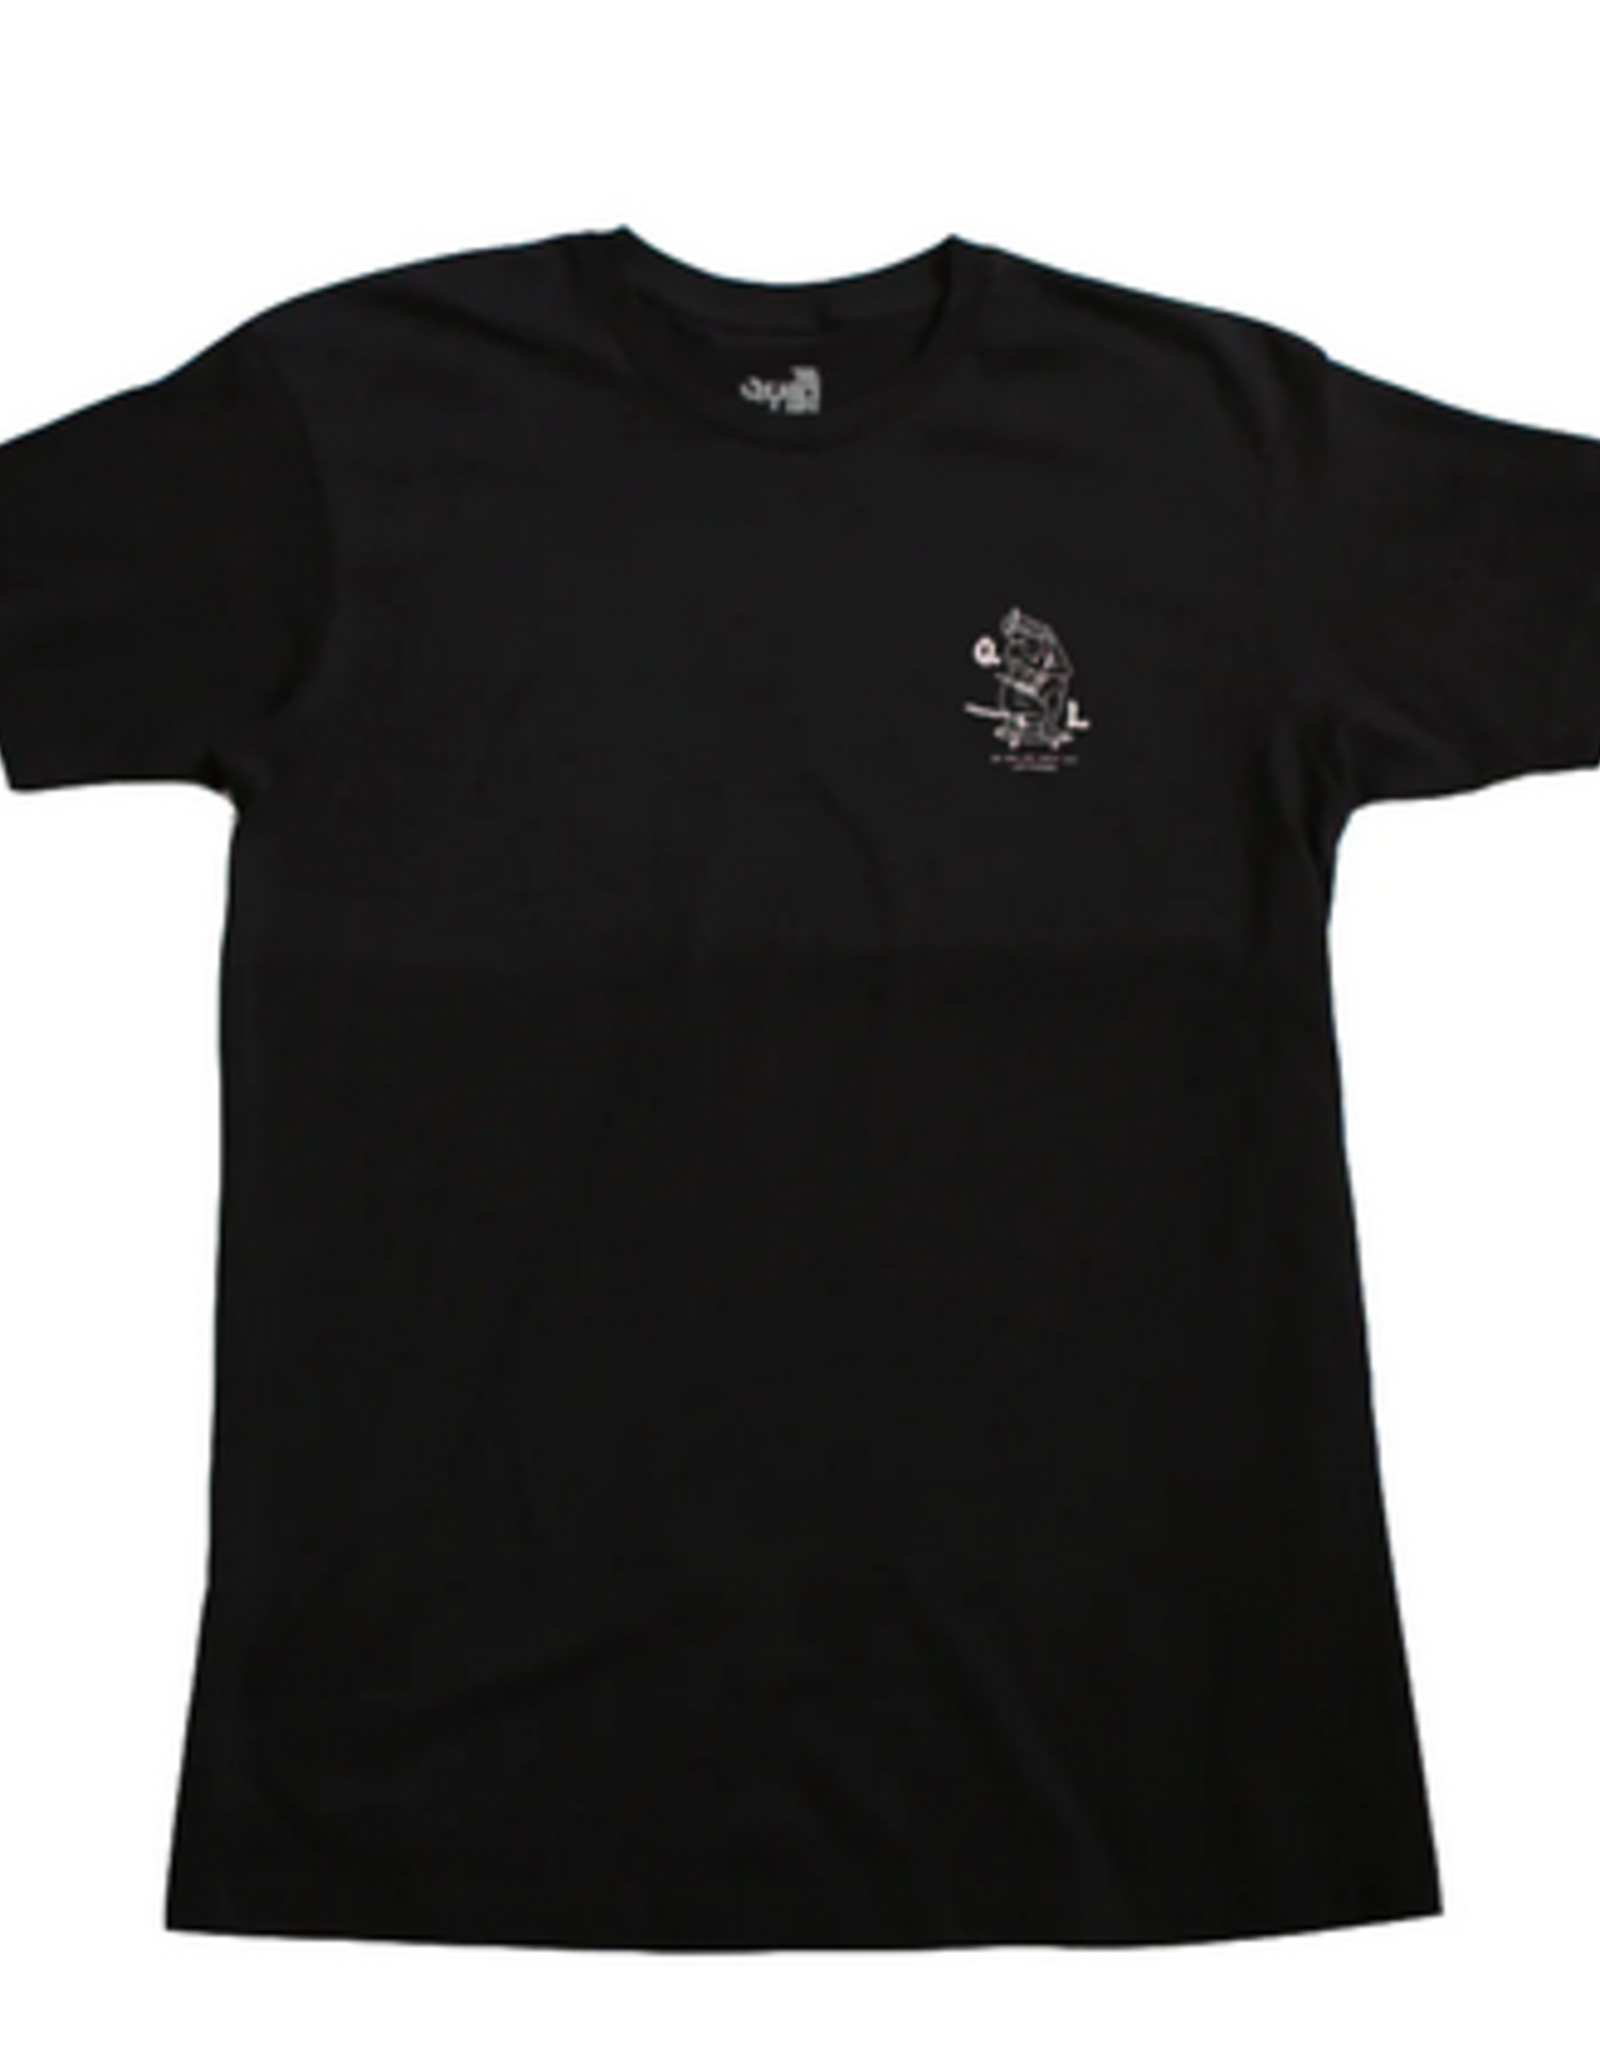 THE QUIET LIFE THE QUIET LIFE KENNEY SHOP TEE BLACK